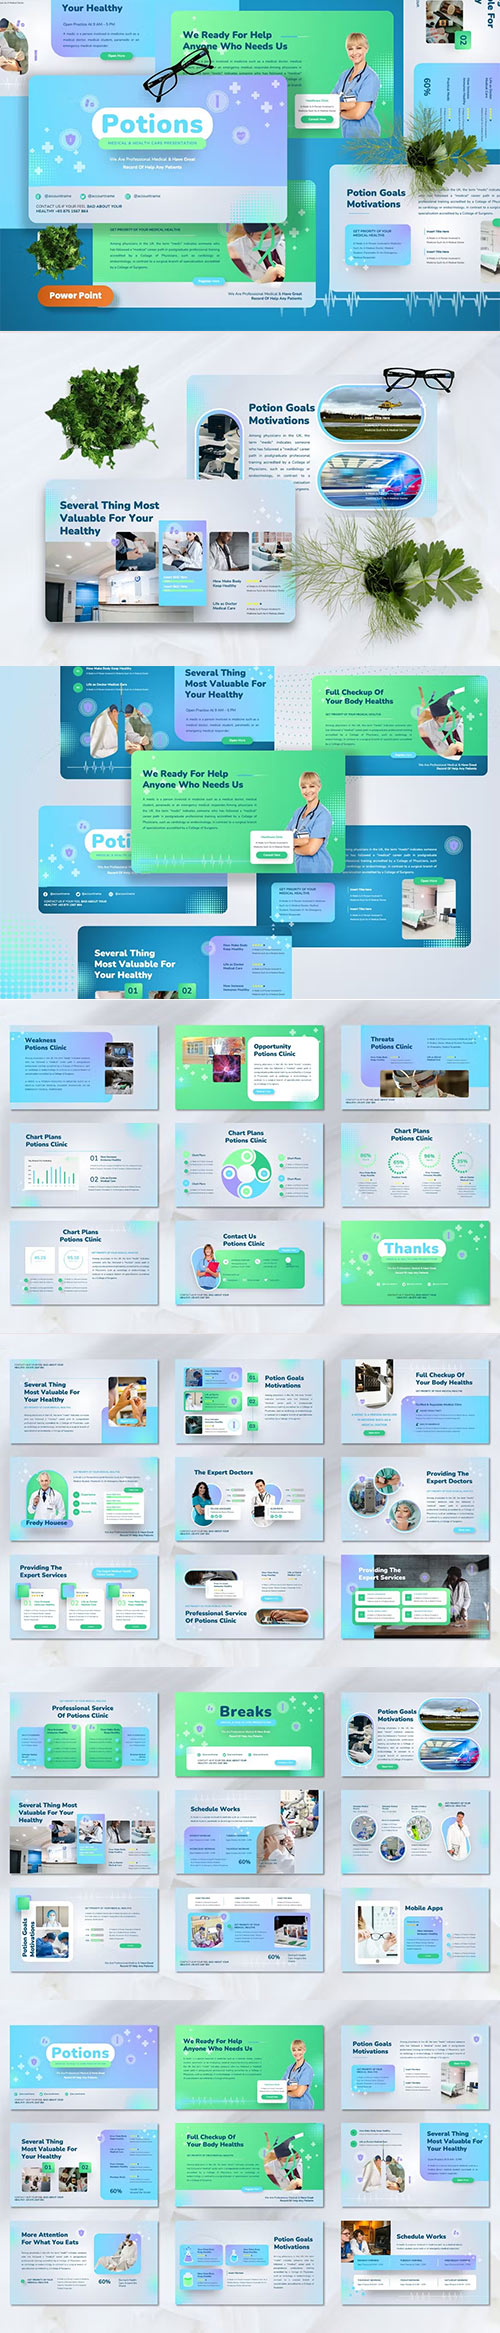 Potions - Medical & Healthcare Powerpoint Template